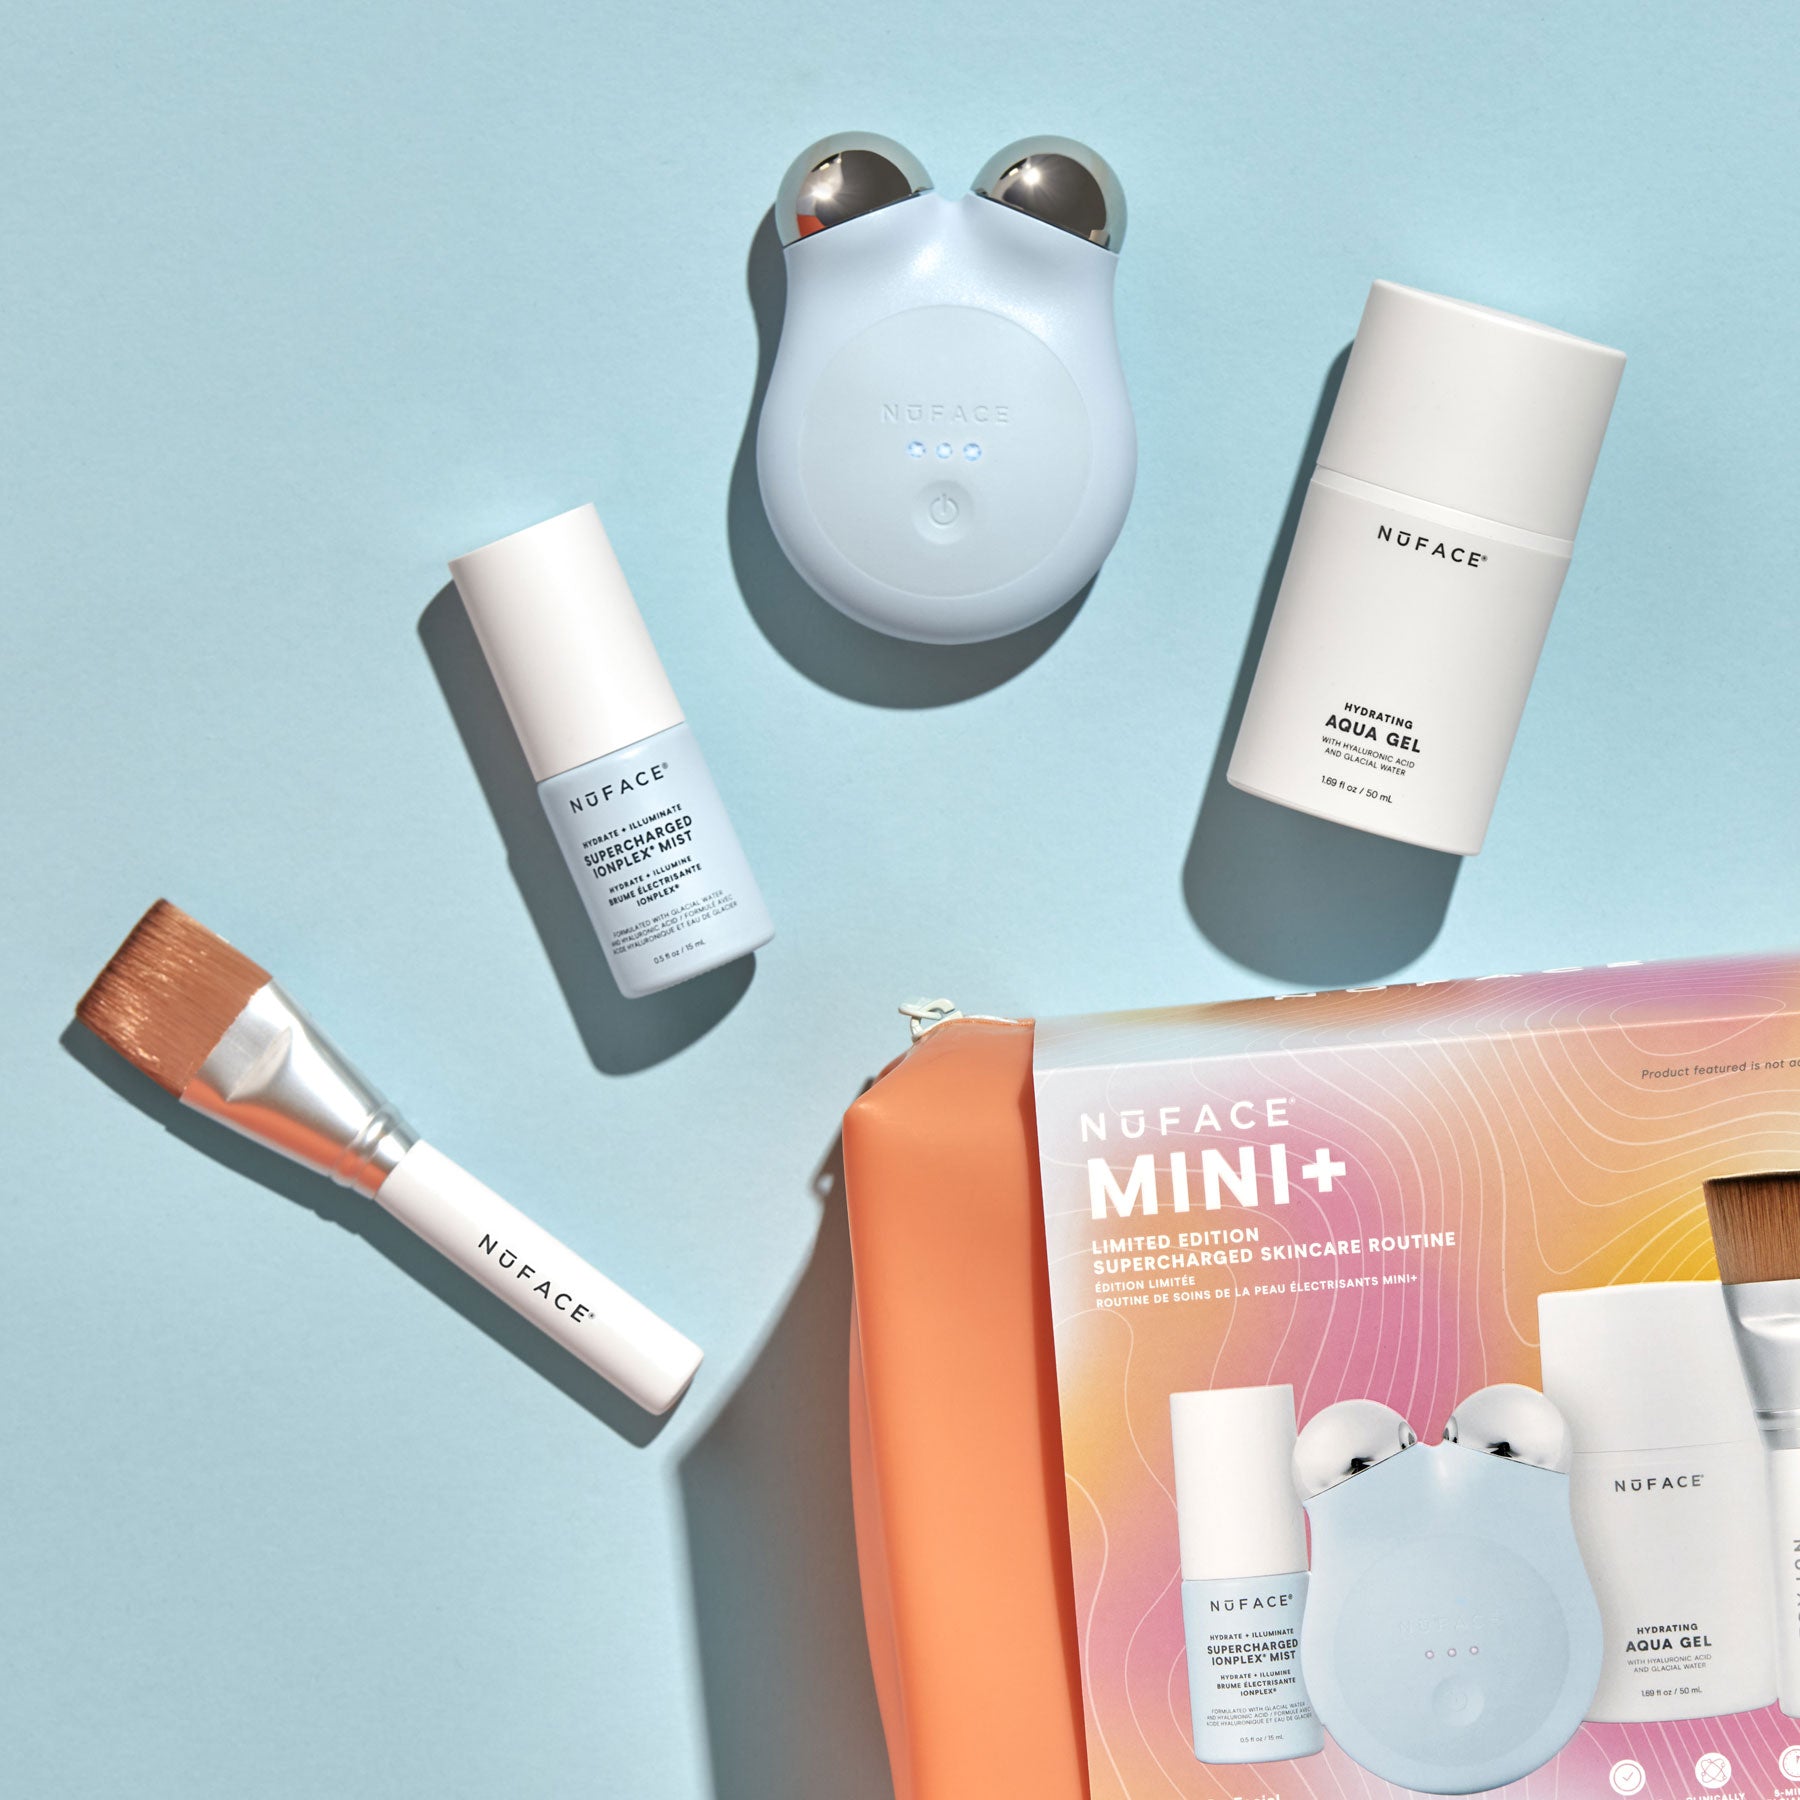 NuFACE Just “Supercharged” Its Cult-Fave Facial Lifting Device for Even More Power